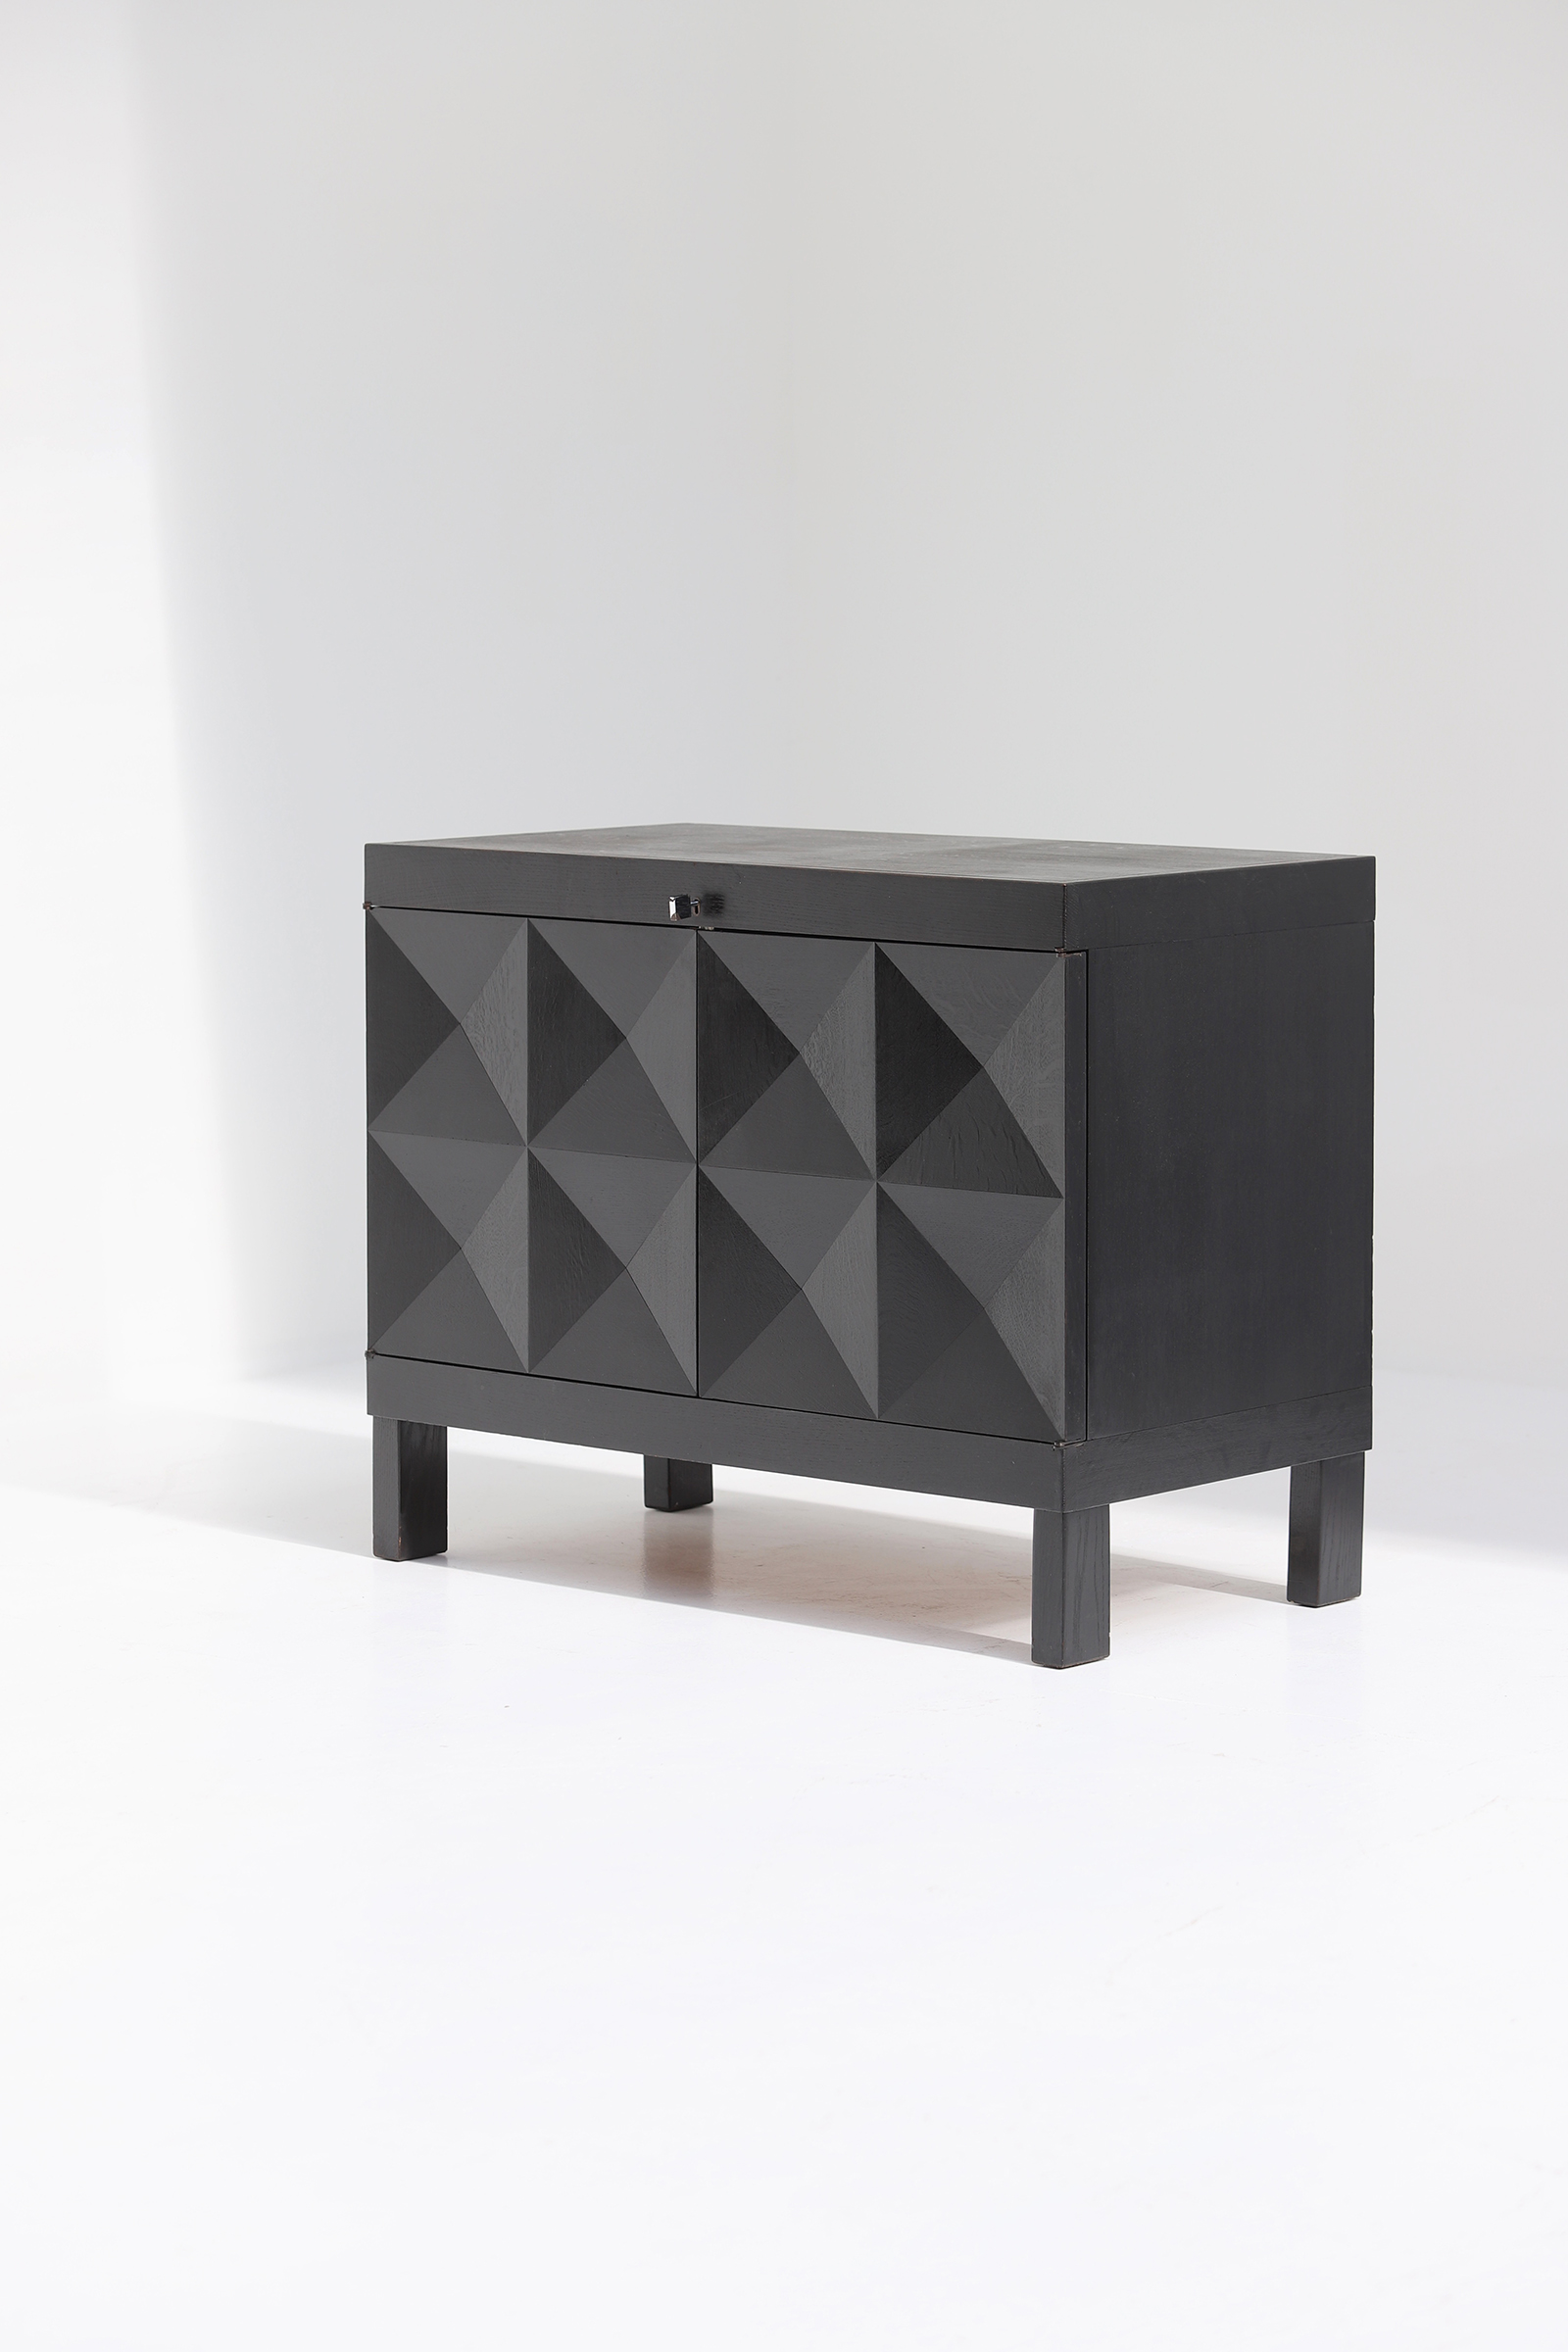 quality crafted cabinet with op-art doors designed by J. Batenburg for MI, Belgium 1969.image 11